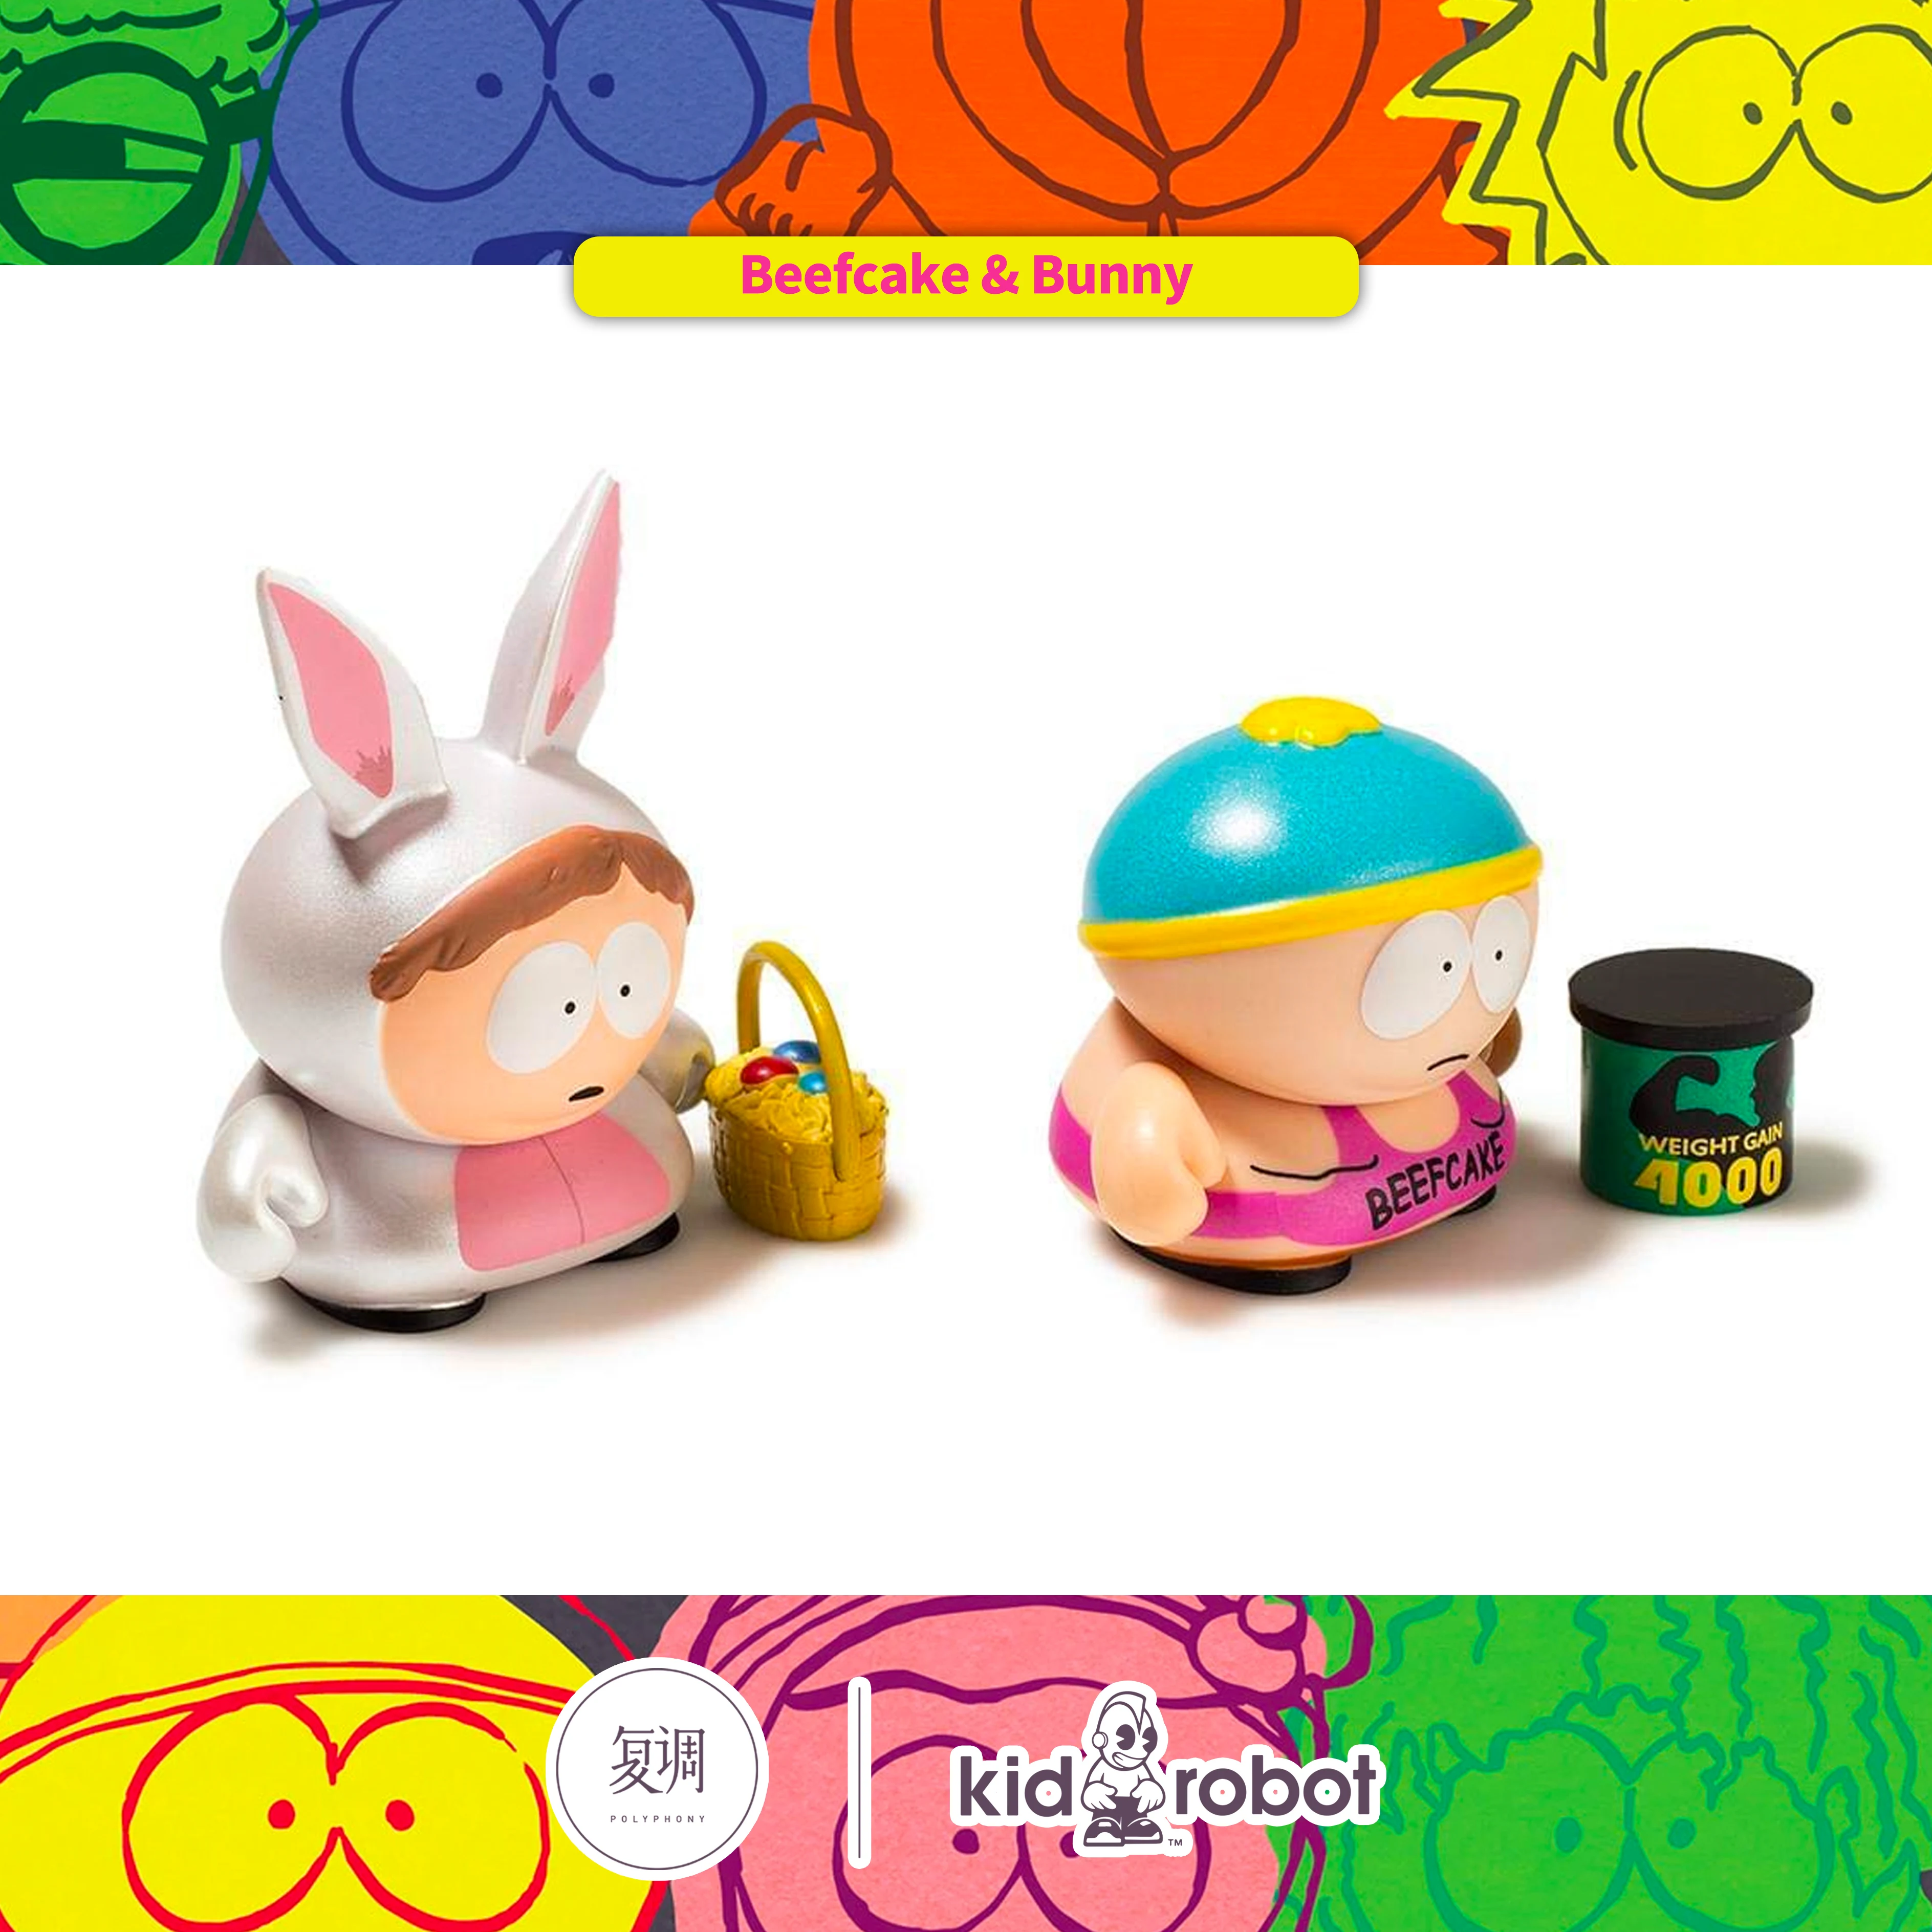 SouthPark Fingerbang and Sumo Toothfairy and Piggy Beefcake and Bunny Keychain Toy Model Collectible Ornaments Kids 2 - South Park Plush